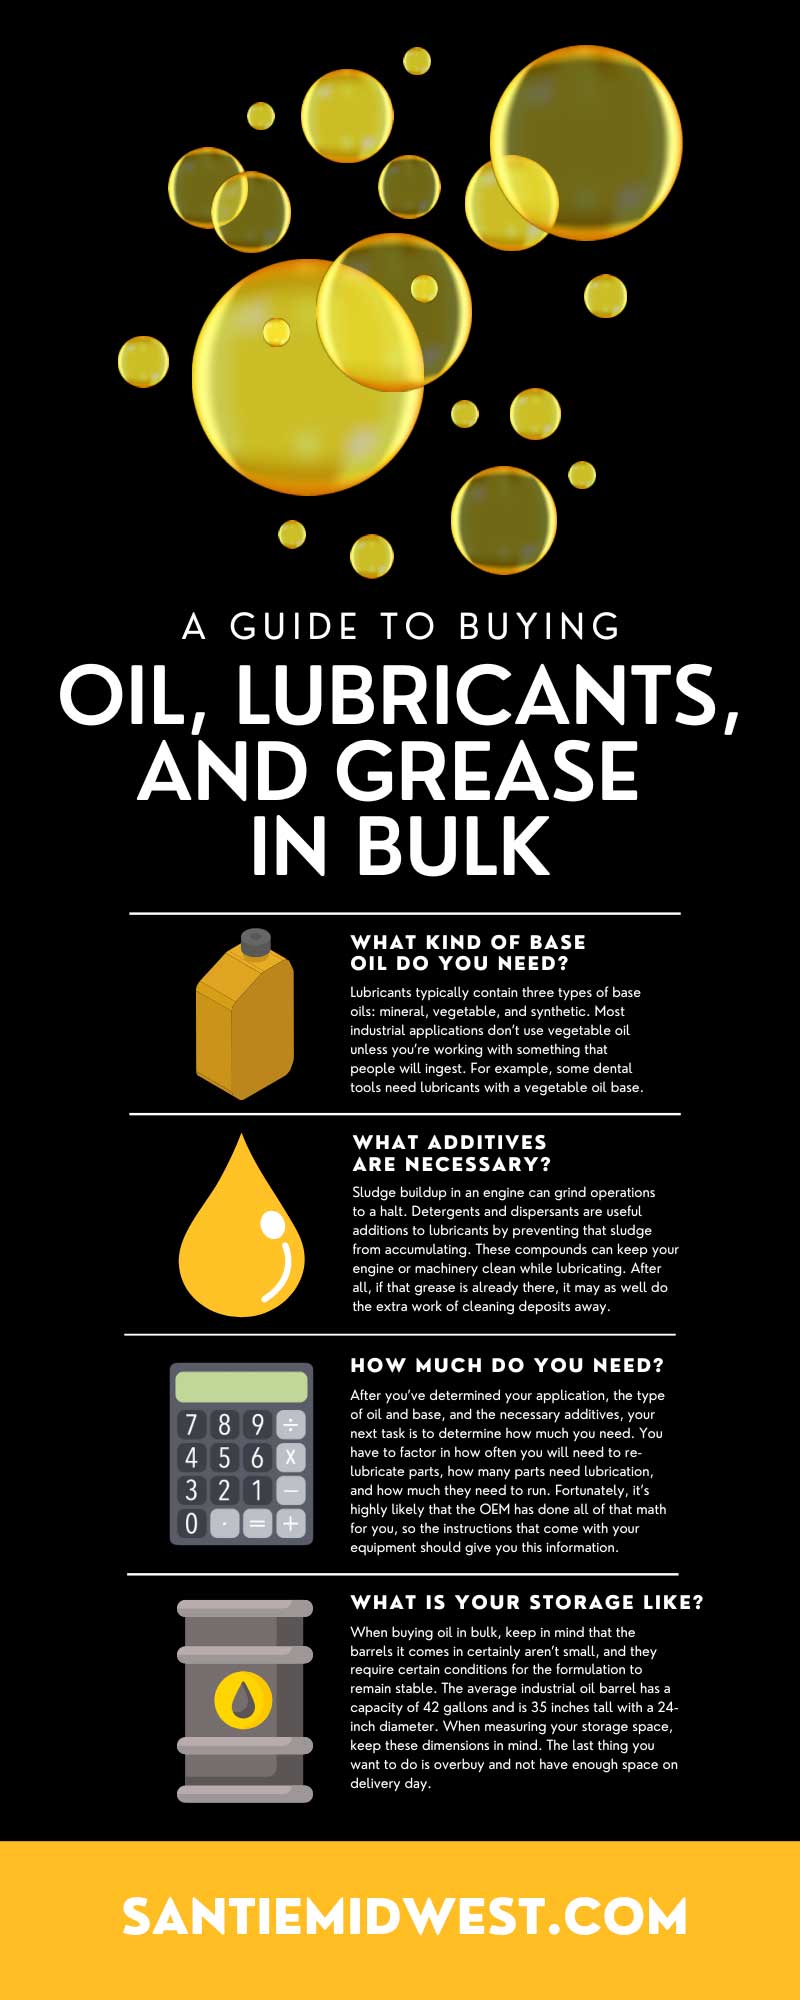 A Guide to Buying Oil, Lubricants, and Grease in Bulk